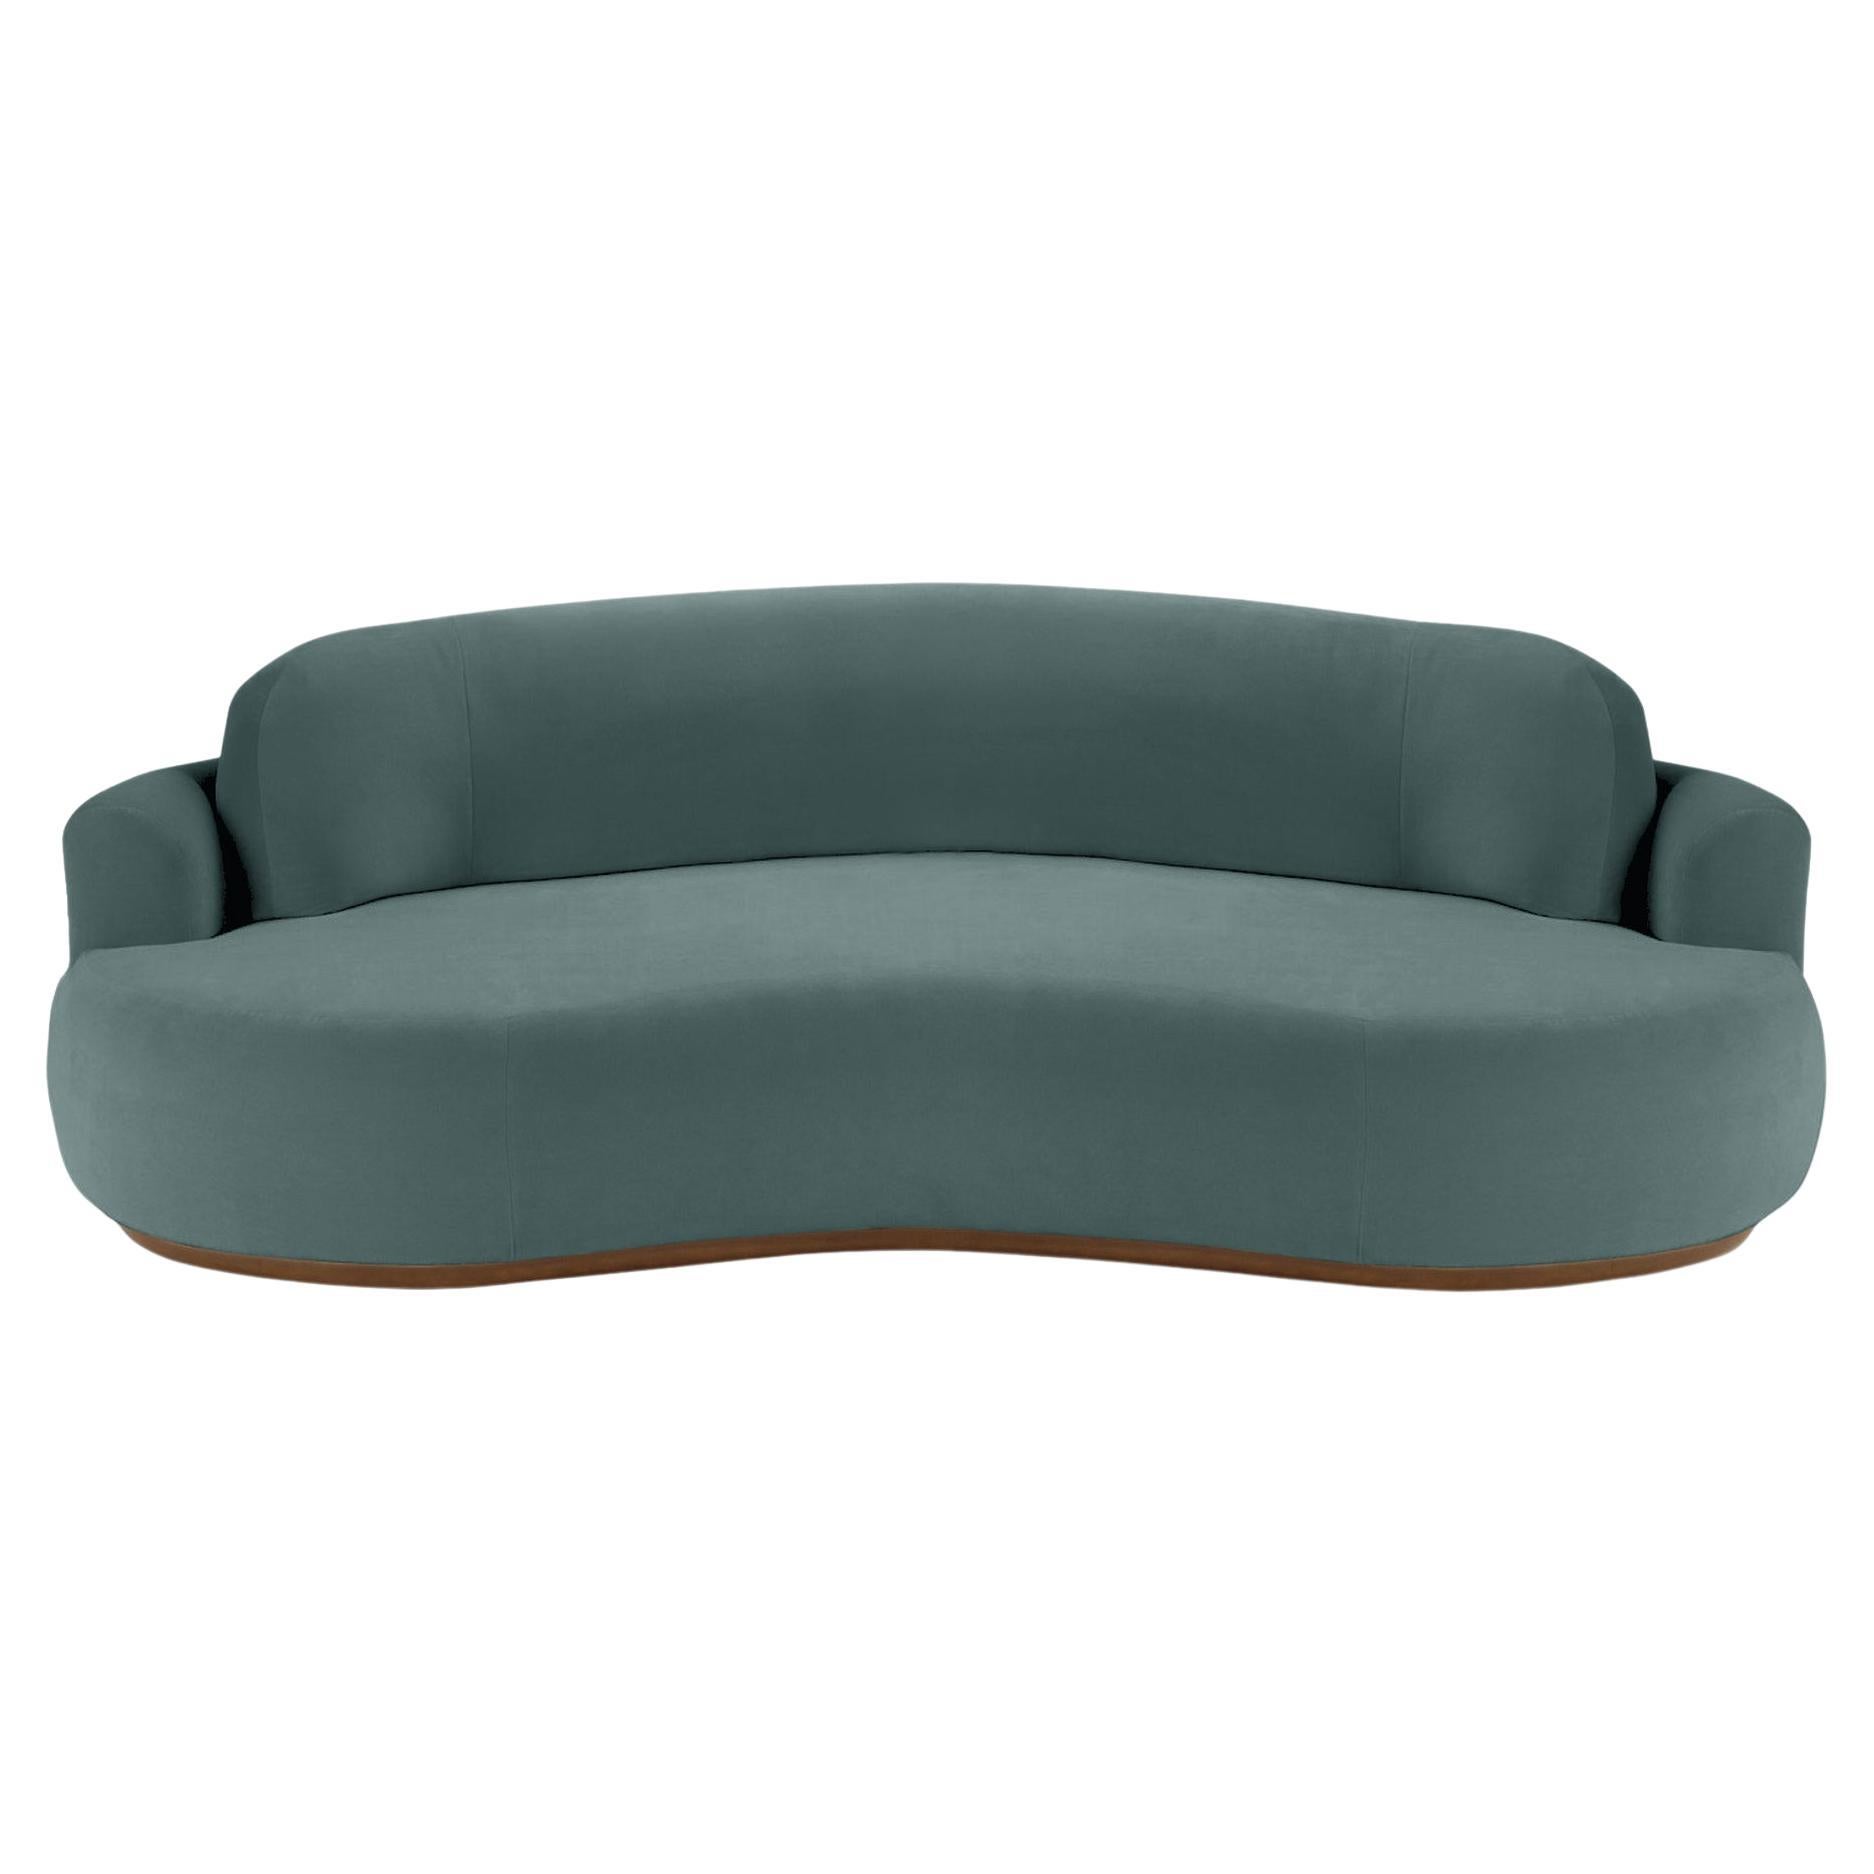 Naked Round Sofa, Small with Beech Ash-056-1 and Teal For Sale